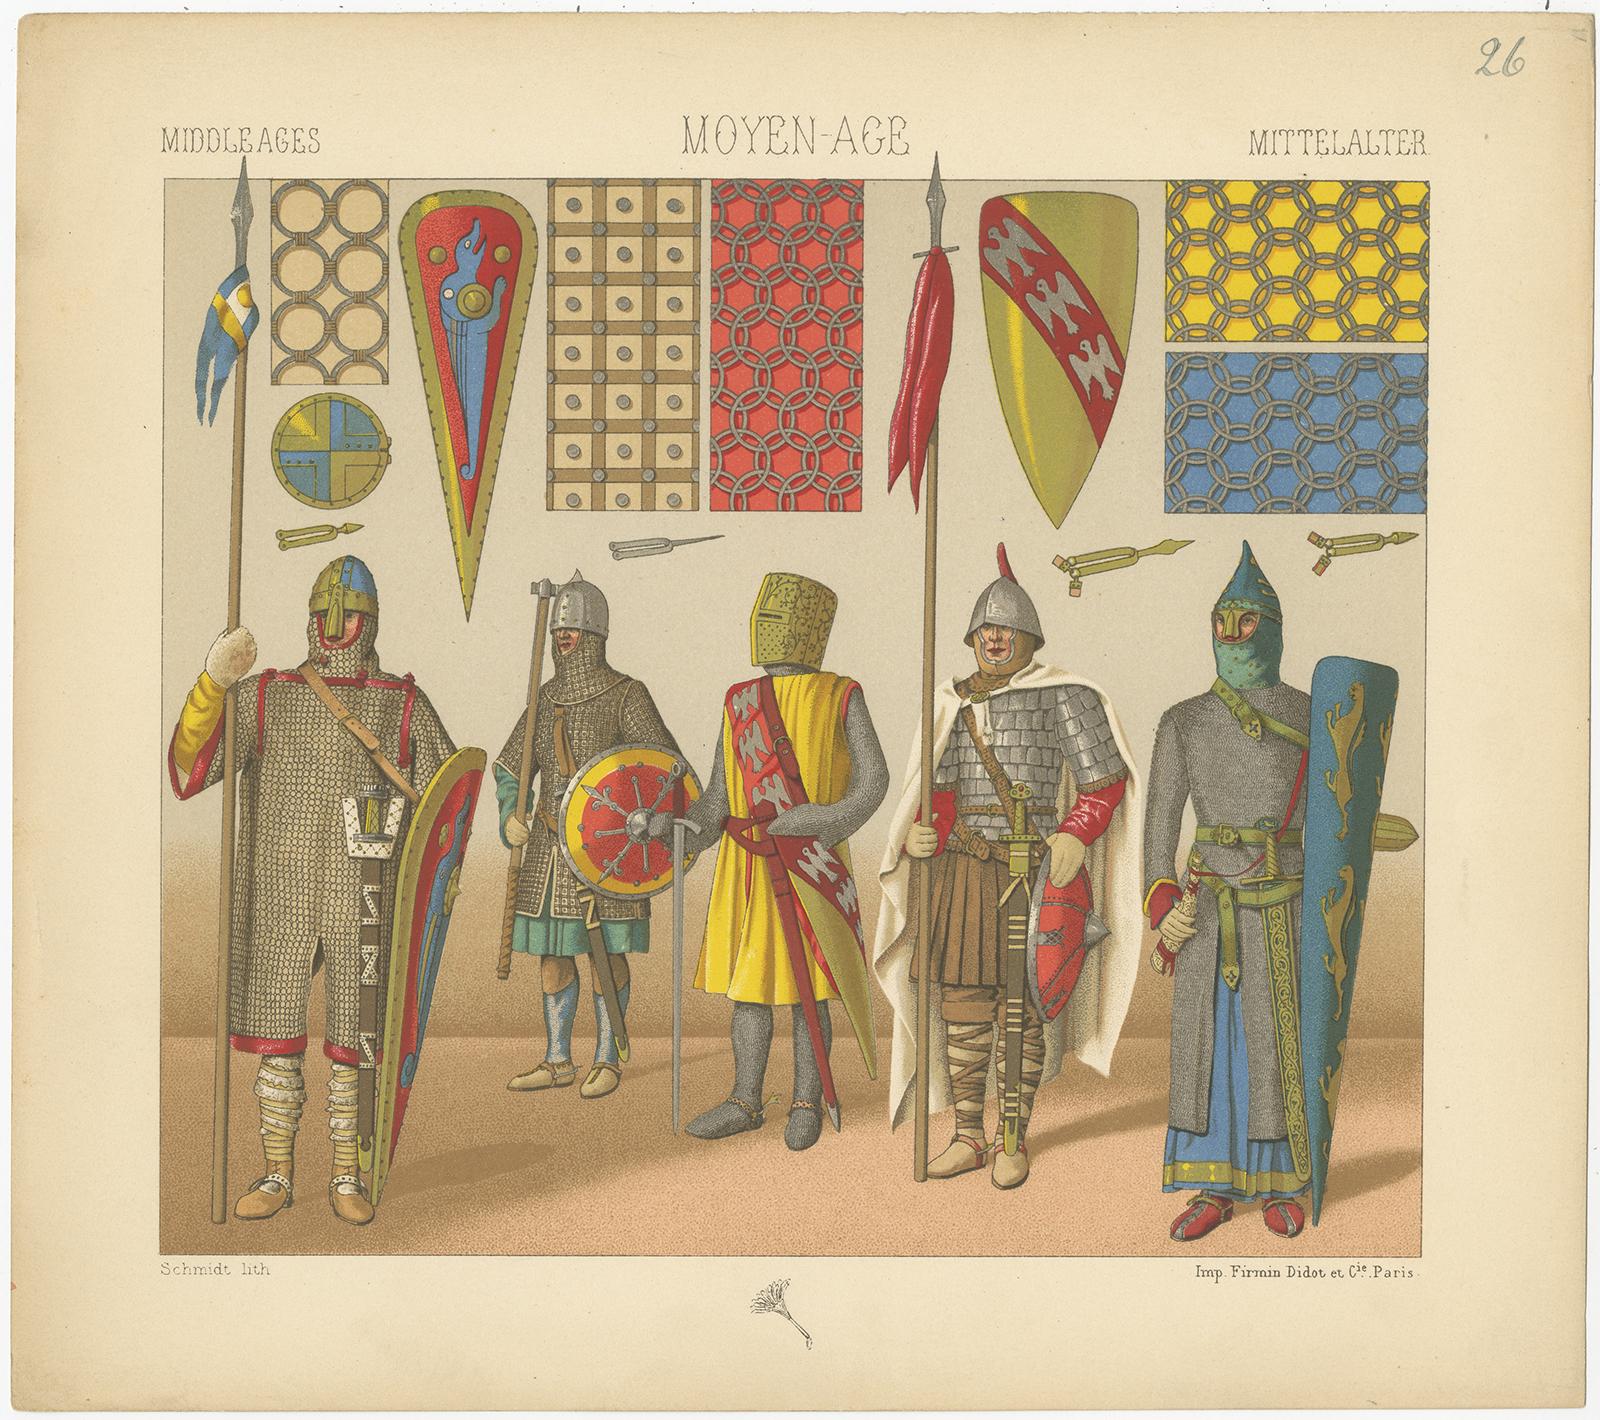 Antique print titled 'Middle Ages - Moyen Age - Mittelalter'. Chromolithograph of Middle Ages Armament'. This print originates from 'Le Costume Historique' by M.A. Racinet. Published circa 1880.